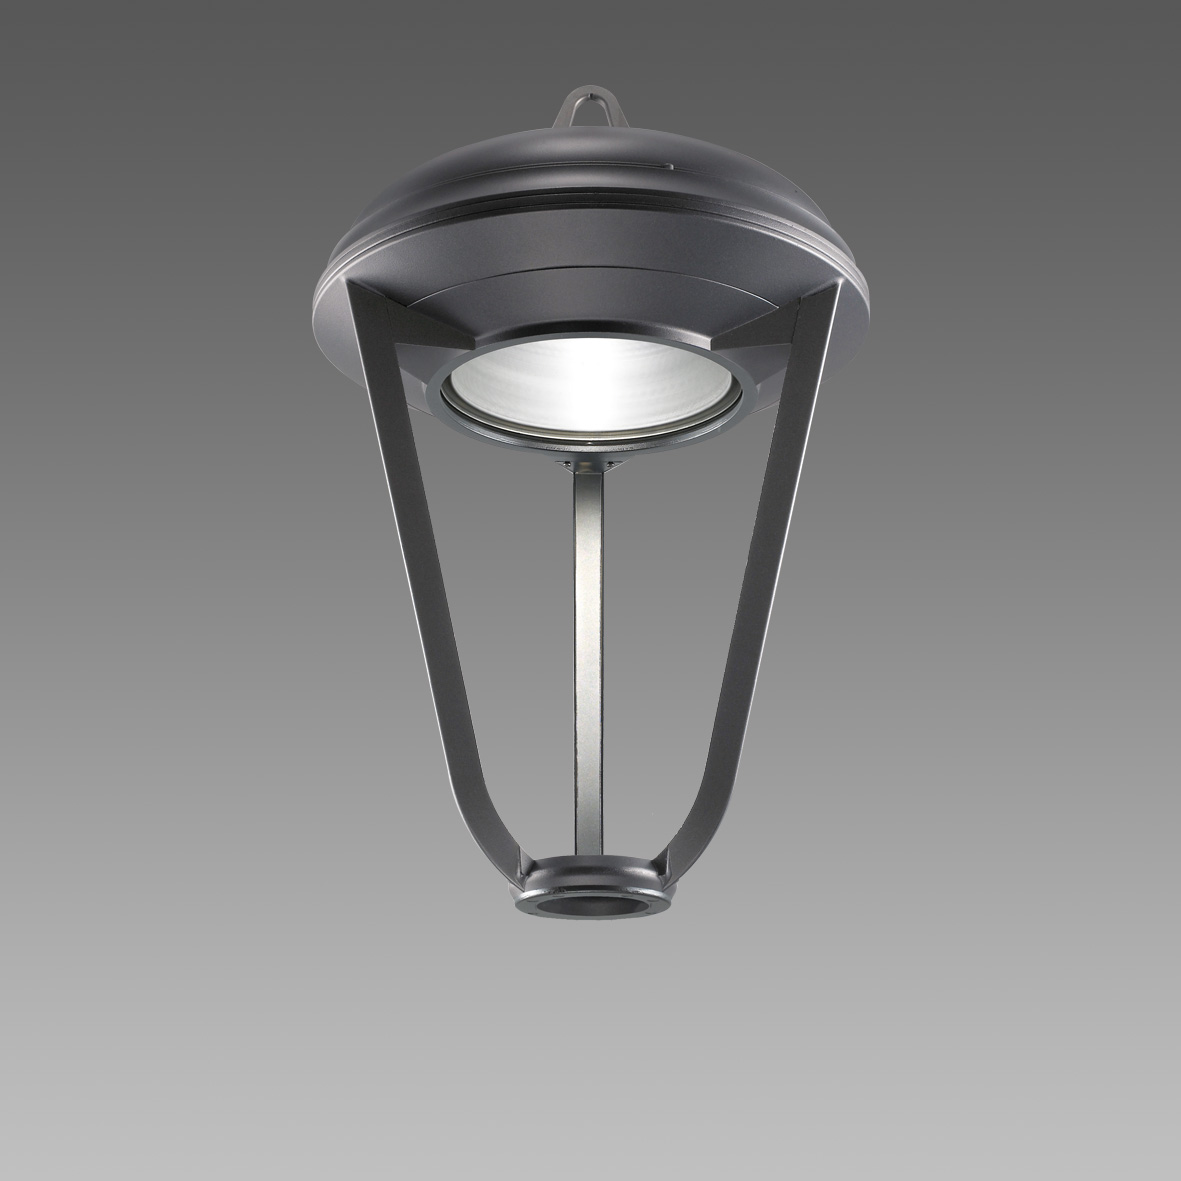 3215 Lucerna R5 suspension lamp with glass